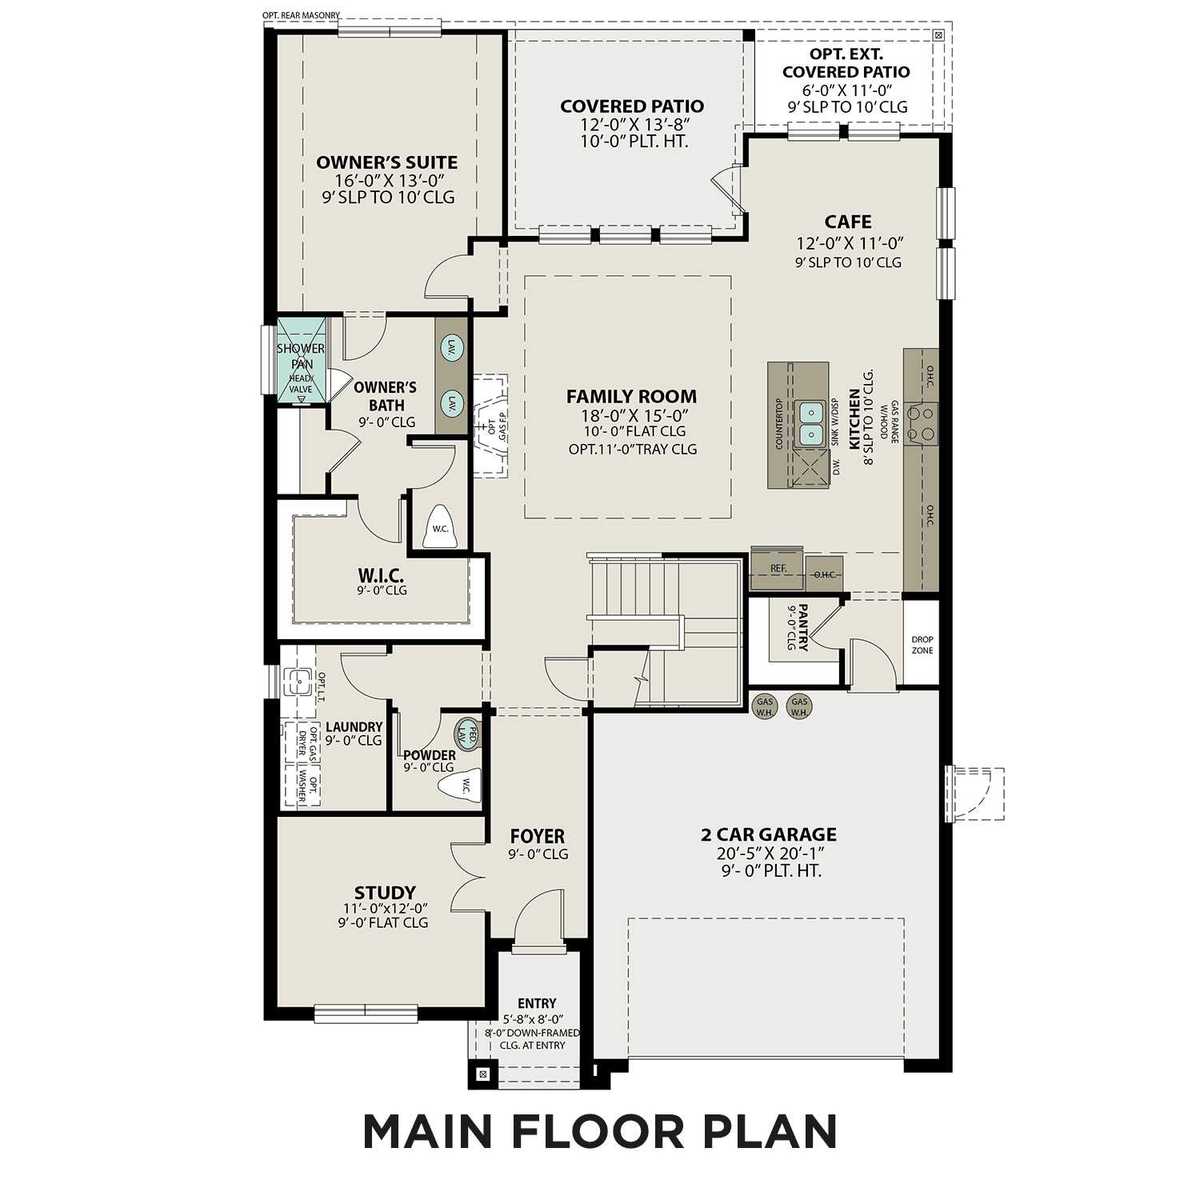 1 - The Sequoia A buildable floor plan layout in Davidson Homes' Sunterra community.